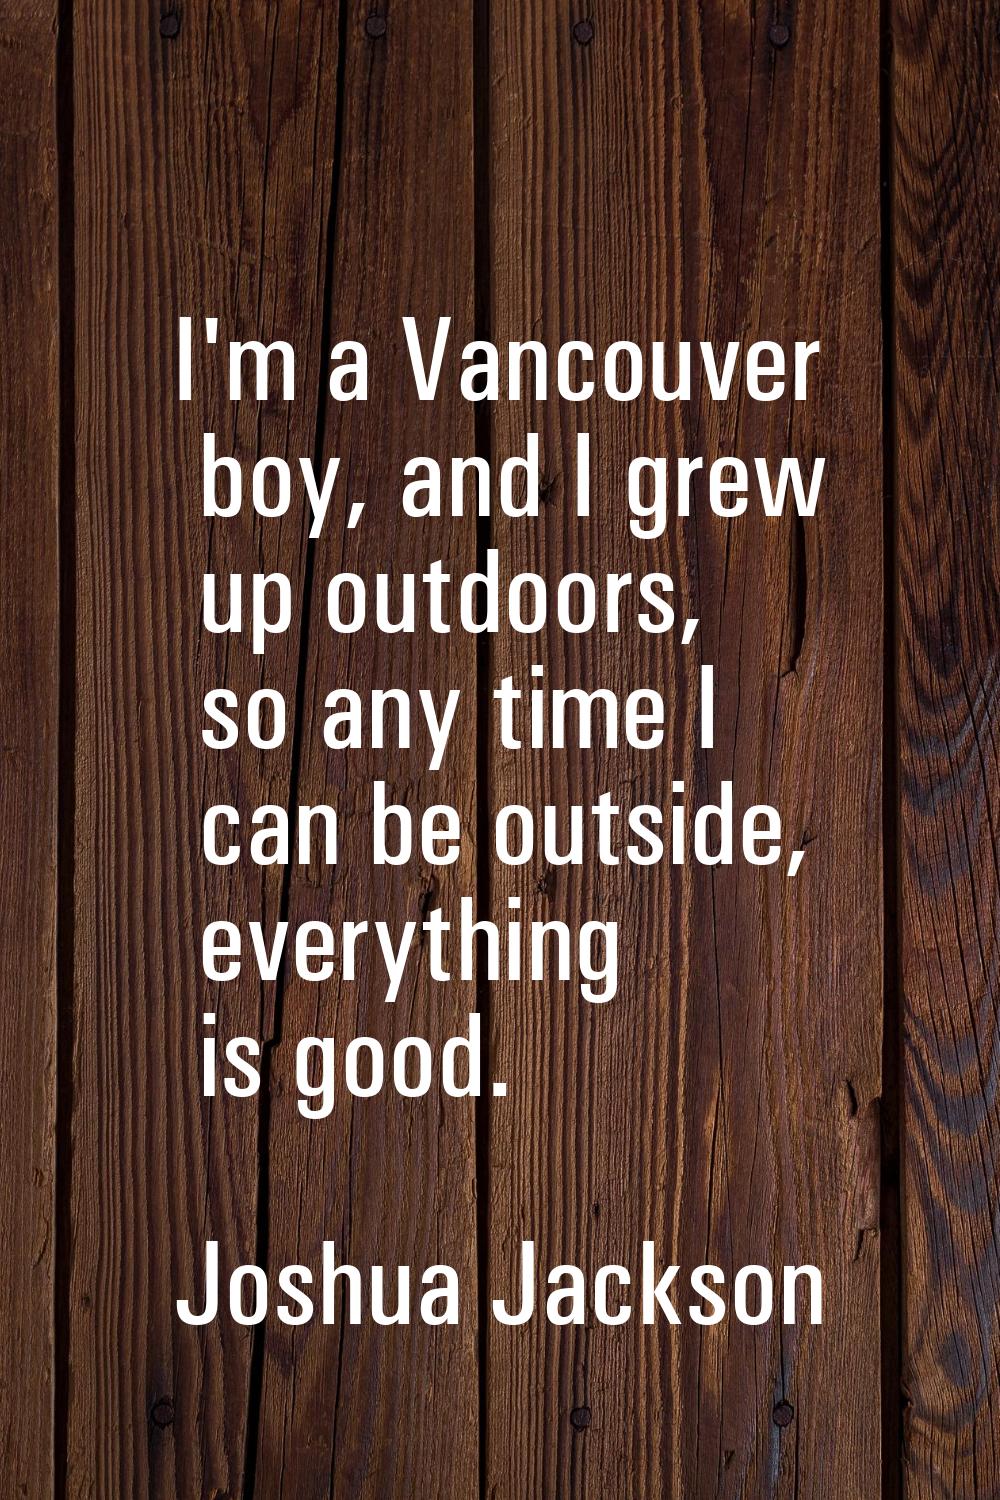 I'm a Vancouver boy, and I grew up outdoors, so any time I can be outside, everything is good.